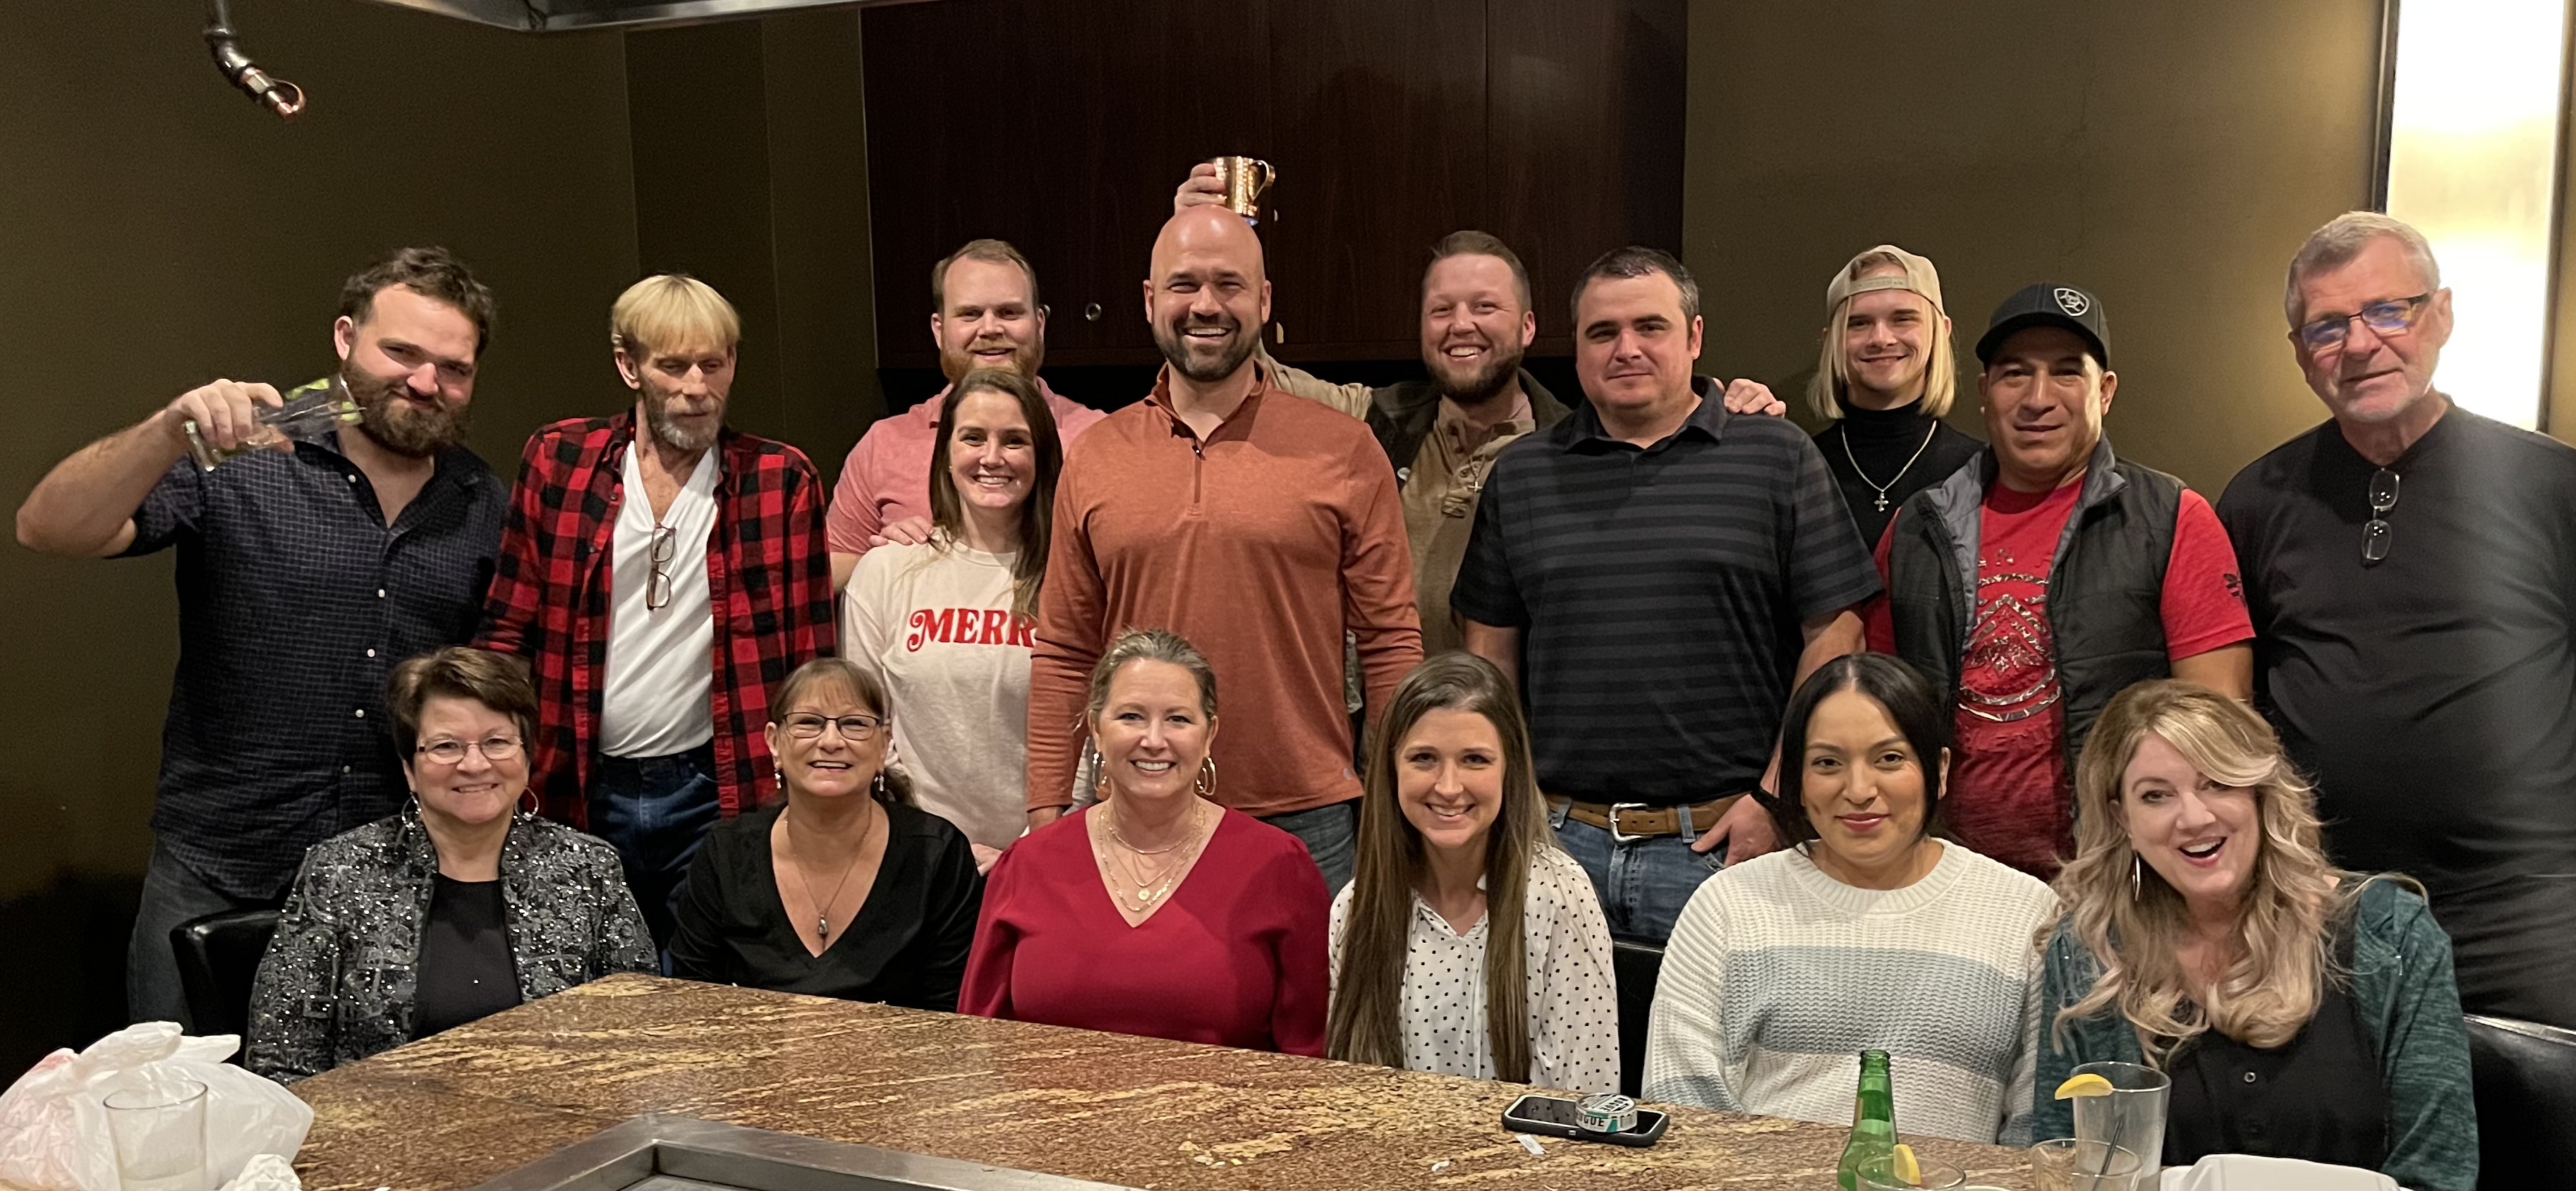 A picture of the Albright Roofing team, 16 total, at our 2022 Christmas party at Kawa's, an Asian restaurant in Tyler, TX.